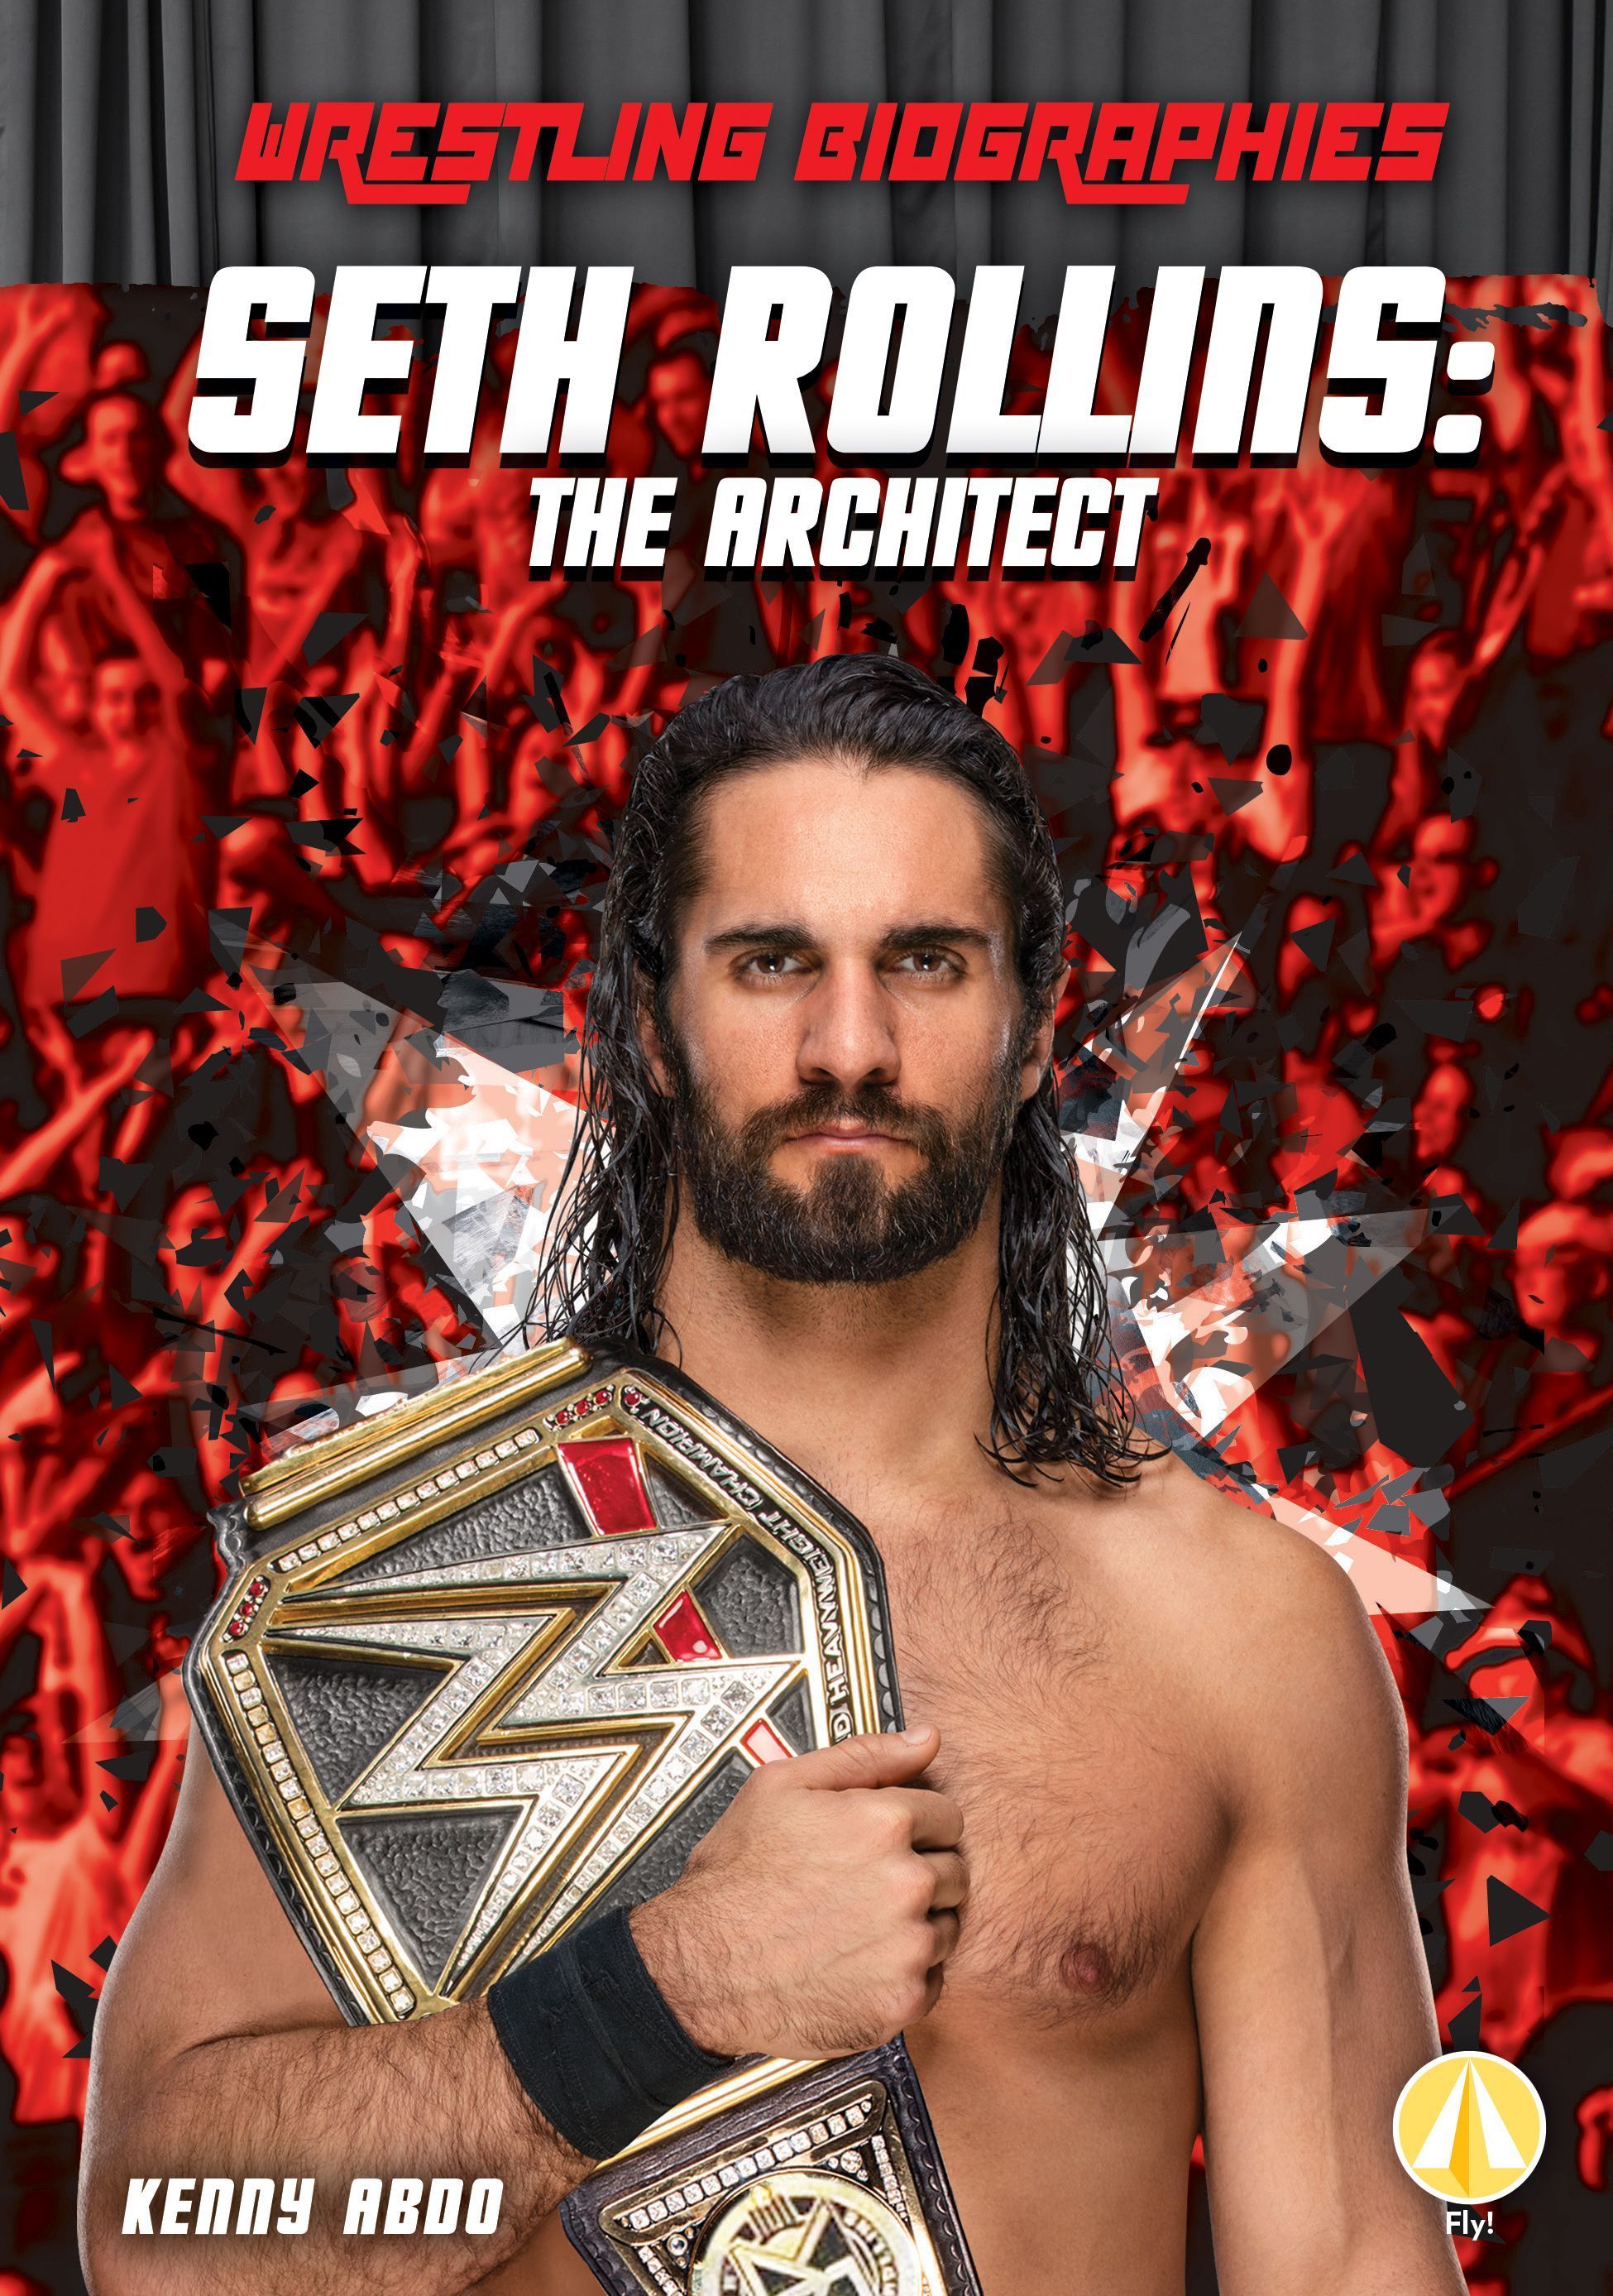 Wrestling Biographies: Seth Rollins: The Architect (Hardcover).com. Seth rollins, Seth, Seth rollins wallpaper